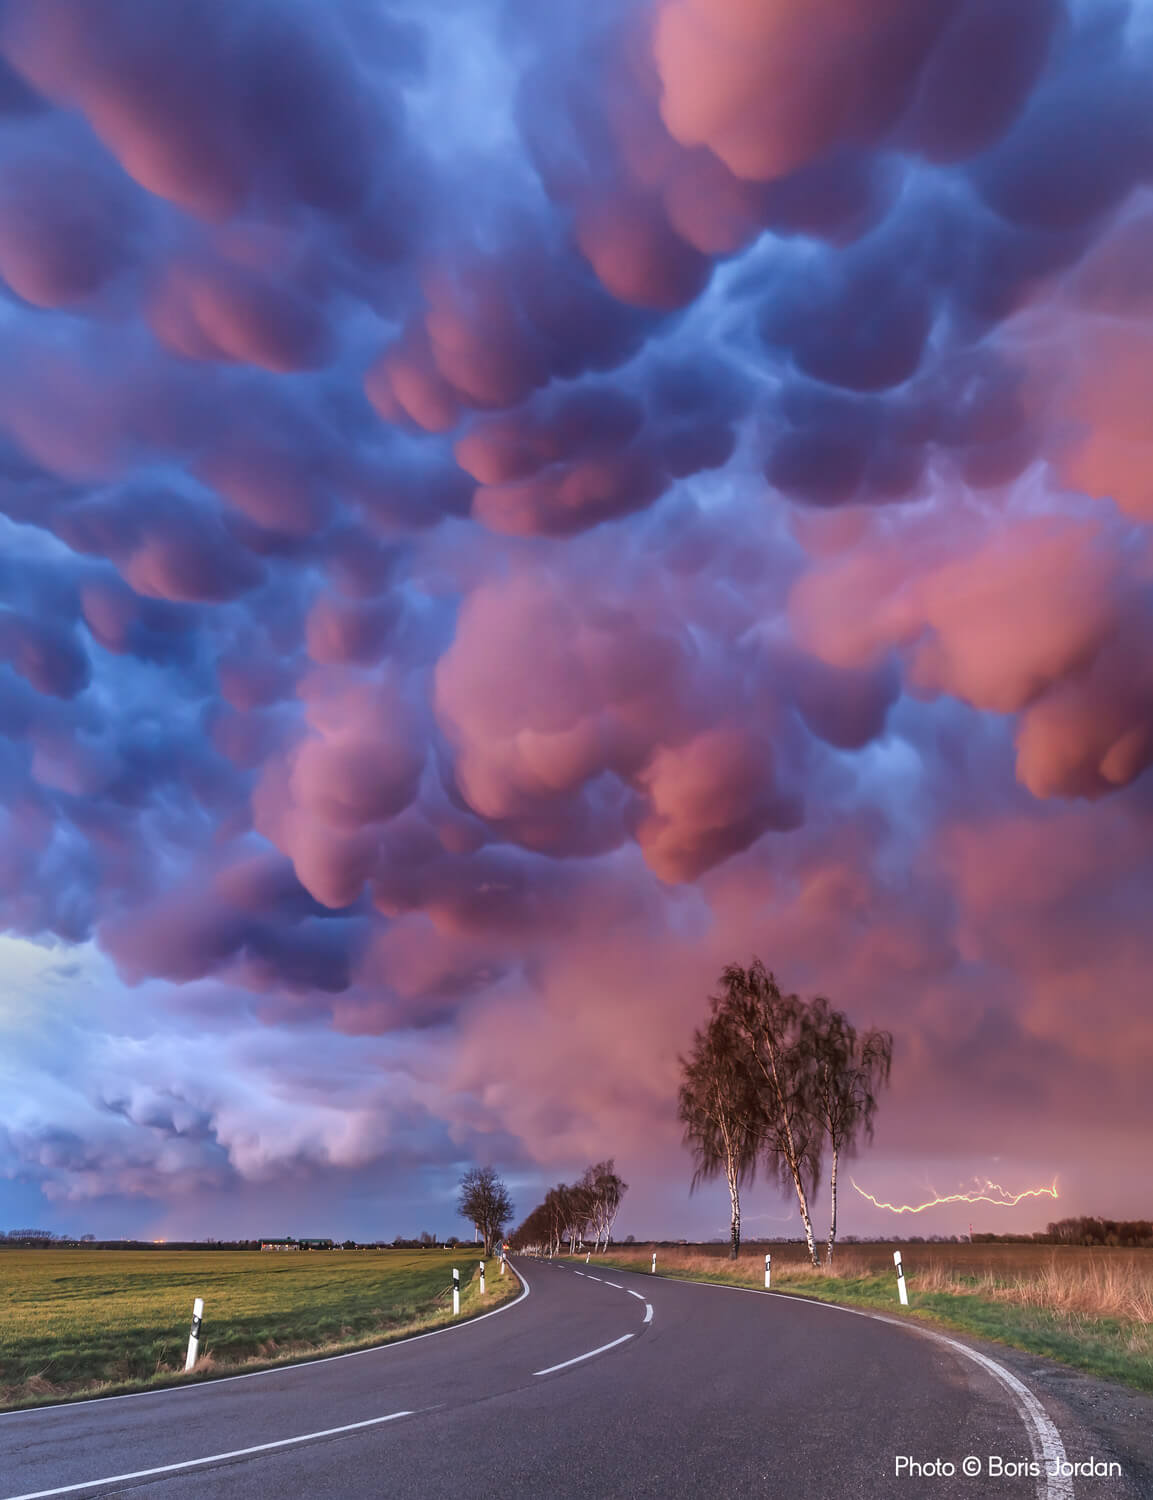 Dramatic clouds in hues of pink and purple fill the sky above a winding country road at dusk, with trees lining one side and a visible lightning strike in the distant horizon.